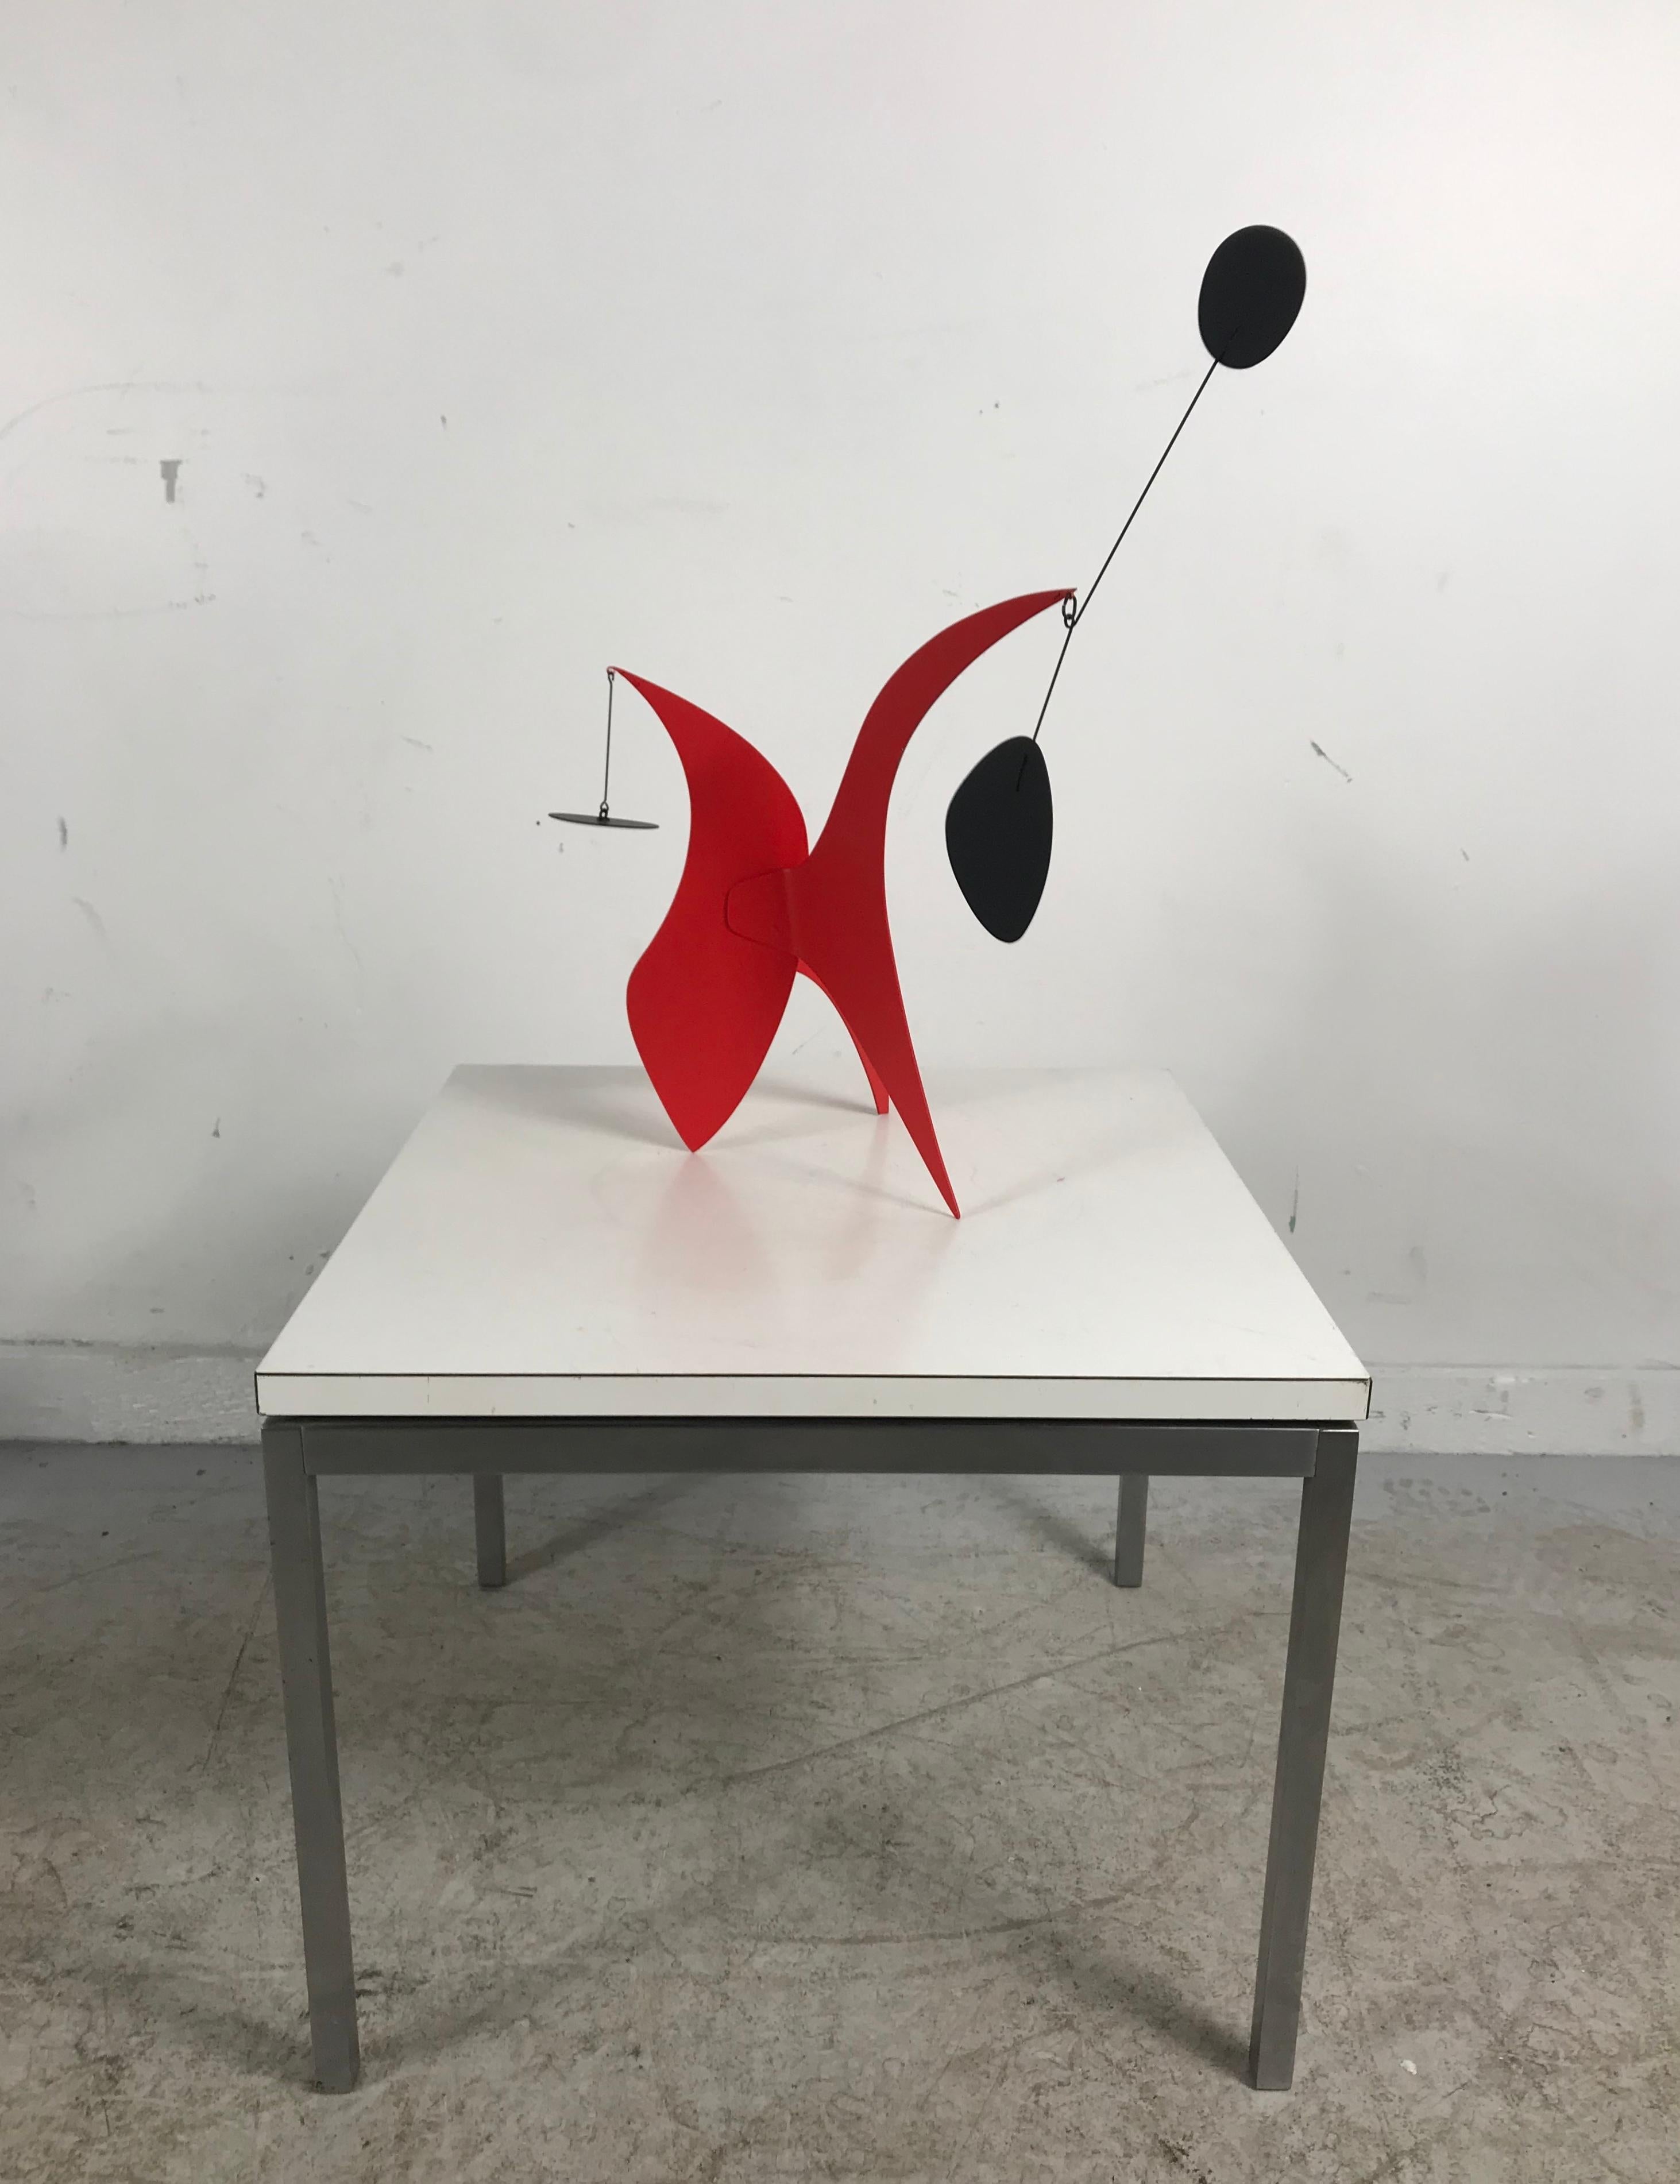 Painted Stunning Modernist Stabile/Table Sculpture by Graham Mitchell Sears